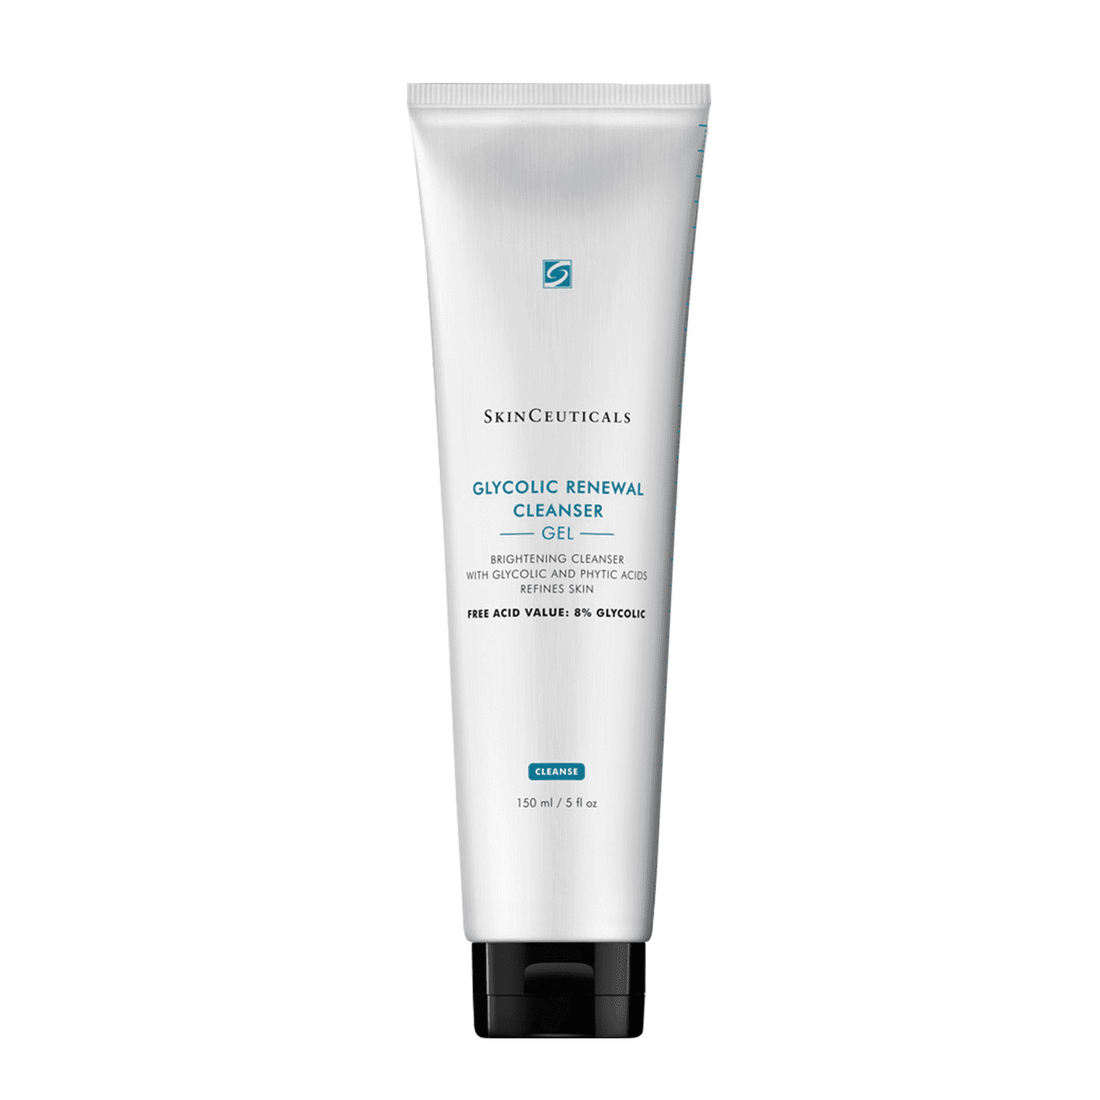 SkinCeuticals Glycolic Renewal Cleanser